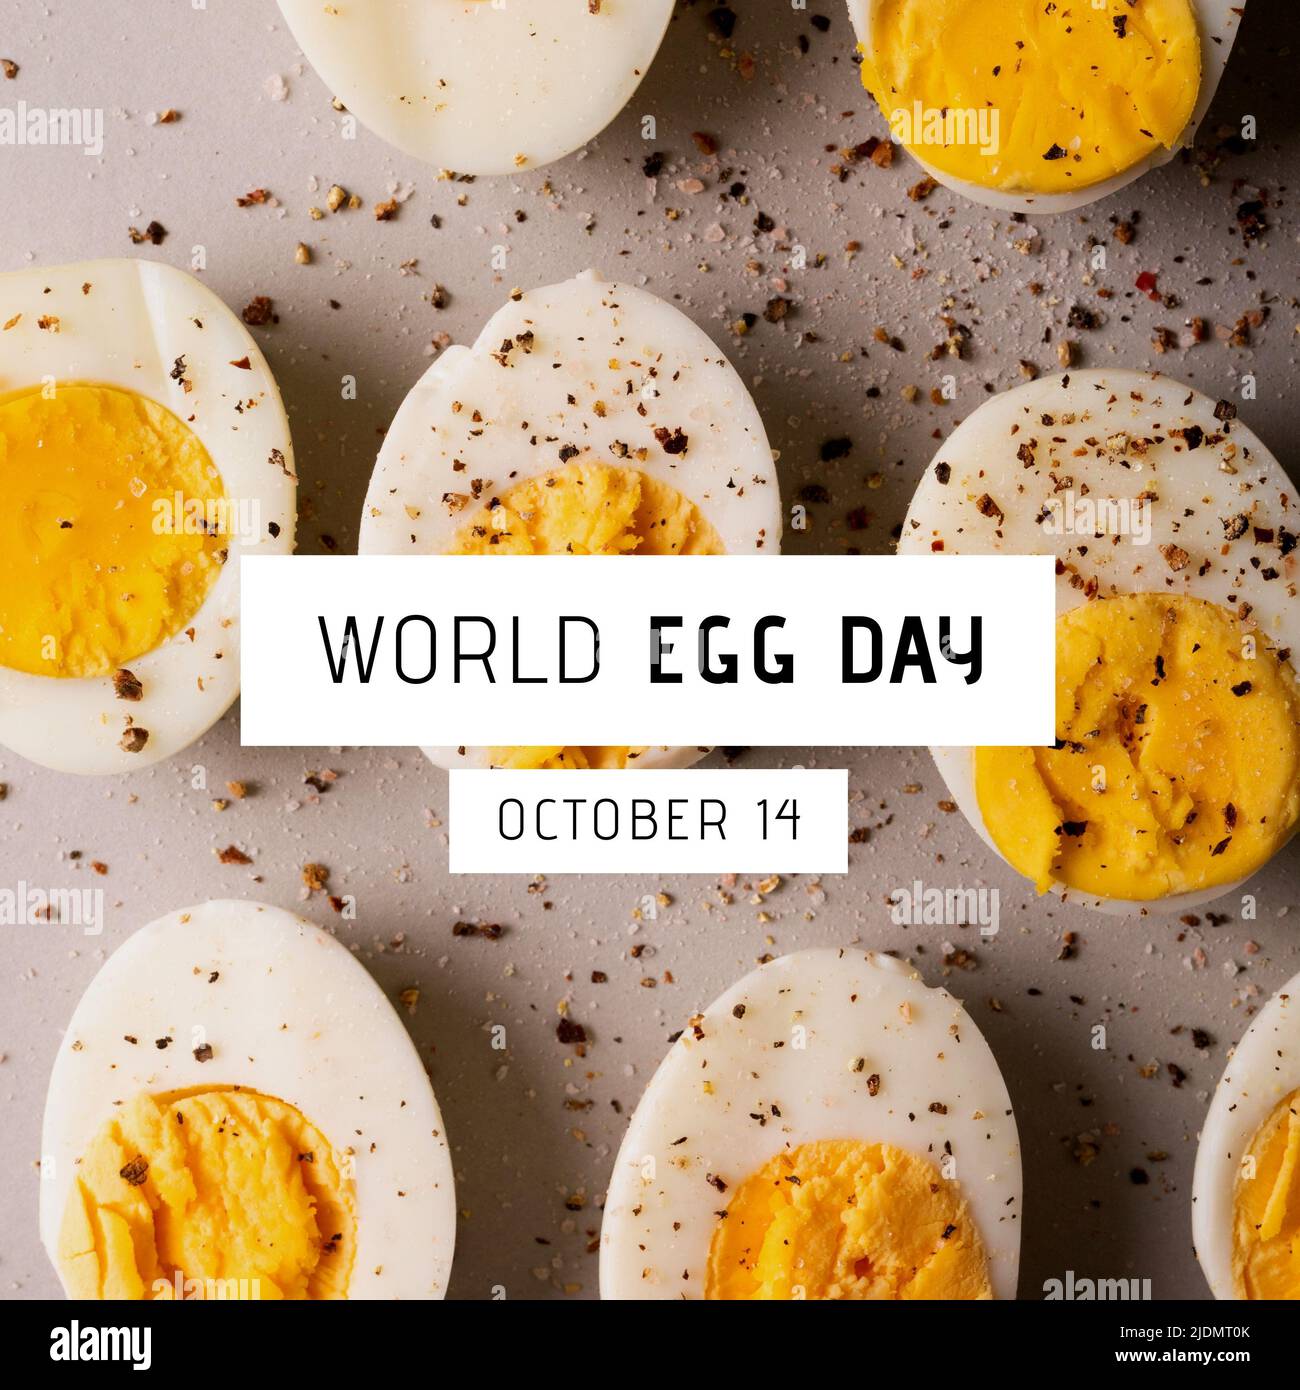 Boiled egg slices with pepper and salt and world egg day with october 14th text on table Stock Photo